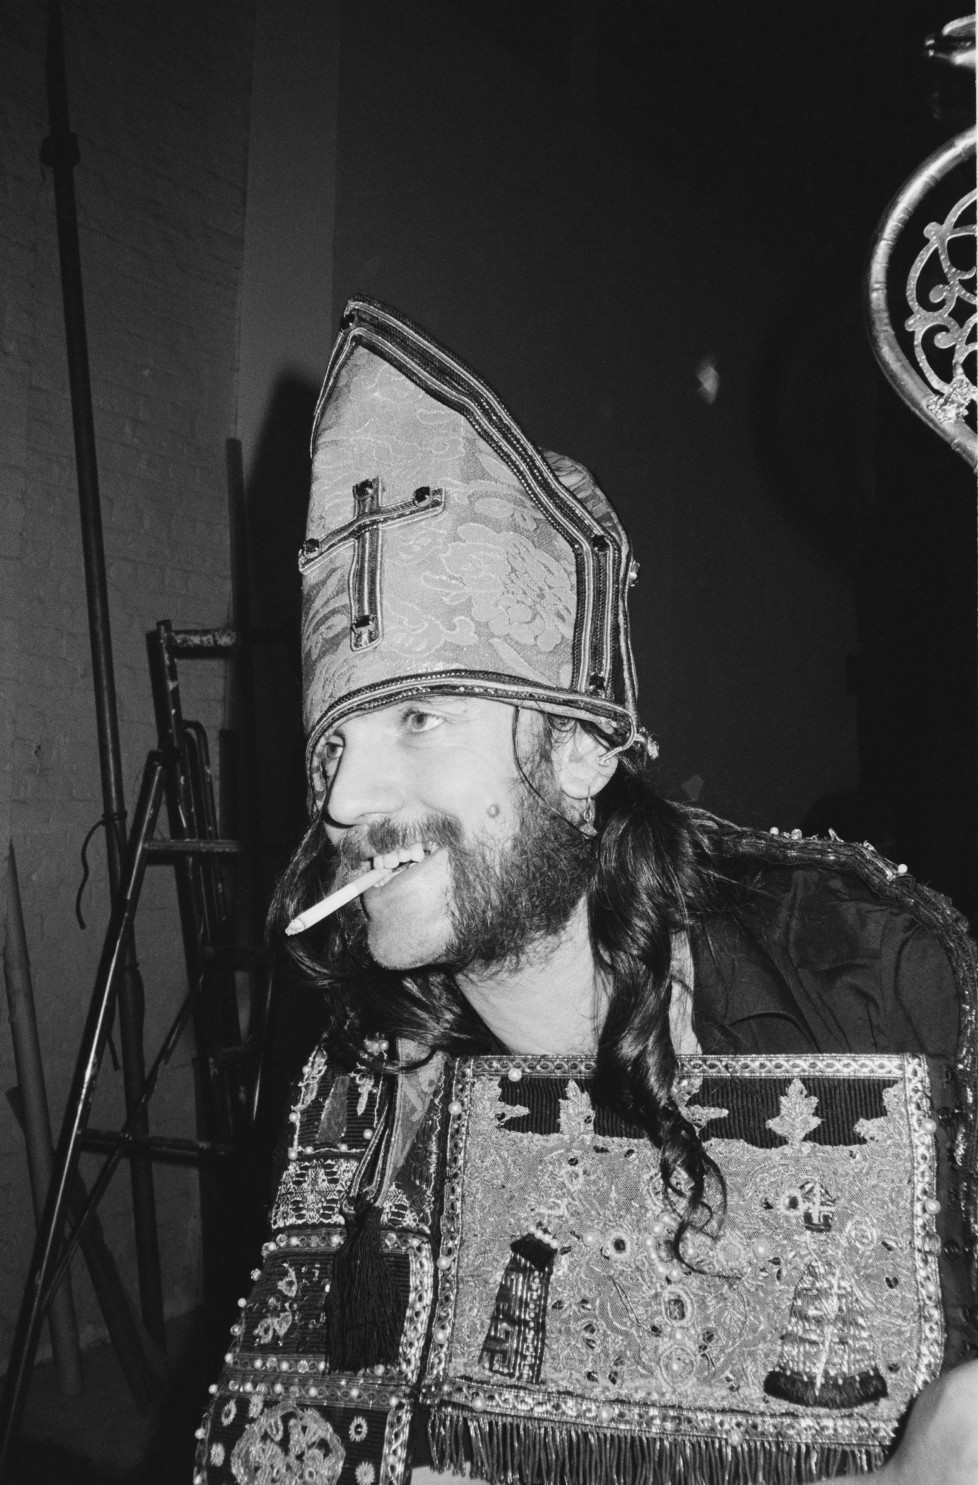 LONDON - 1st JULY: Lemmy Kilmister from Motorhead posed wearing a bishop's mitre hat and smoking a cigarette during the photo session for the 'Killed By Death' single in Pimlico, london in July 1984. (Photo by Fin Costello/Redferns)